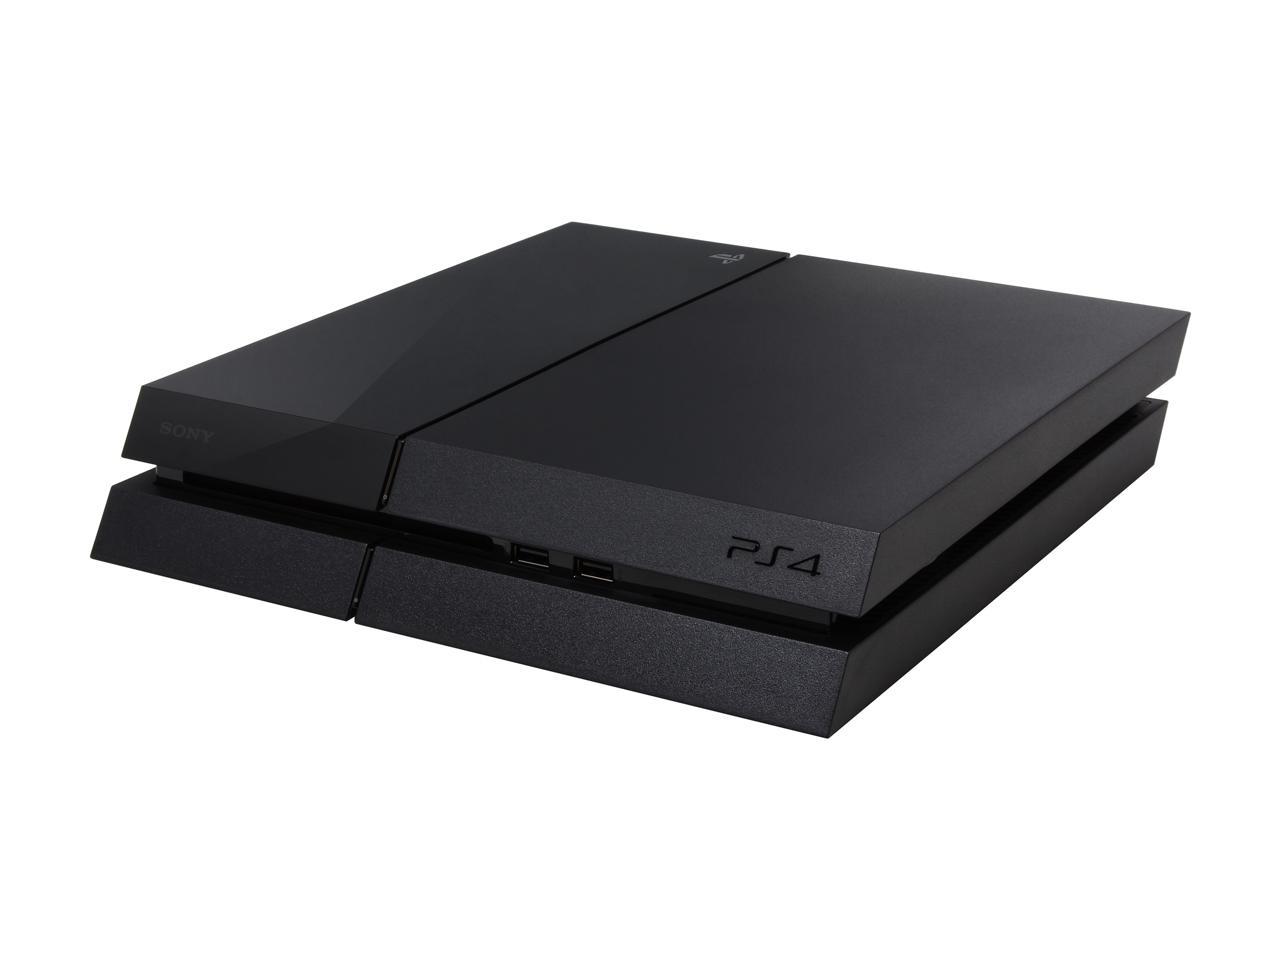 Ps4 ремонтundefined. PLAYSTATION 4 Console. Sony PLAYSTATION 4 Pro PNG. Sony PLAYSTATION 2 Console icon. Приставка Sony PLAYSTATION 5 PNG.